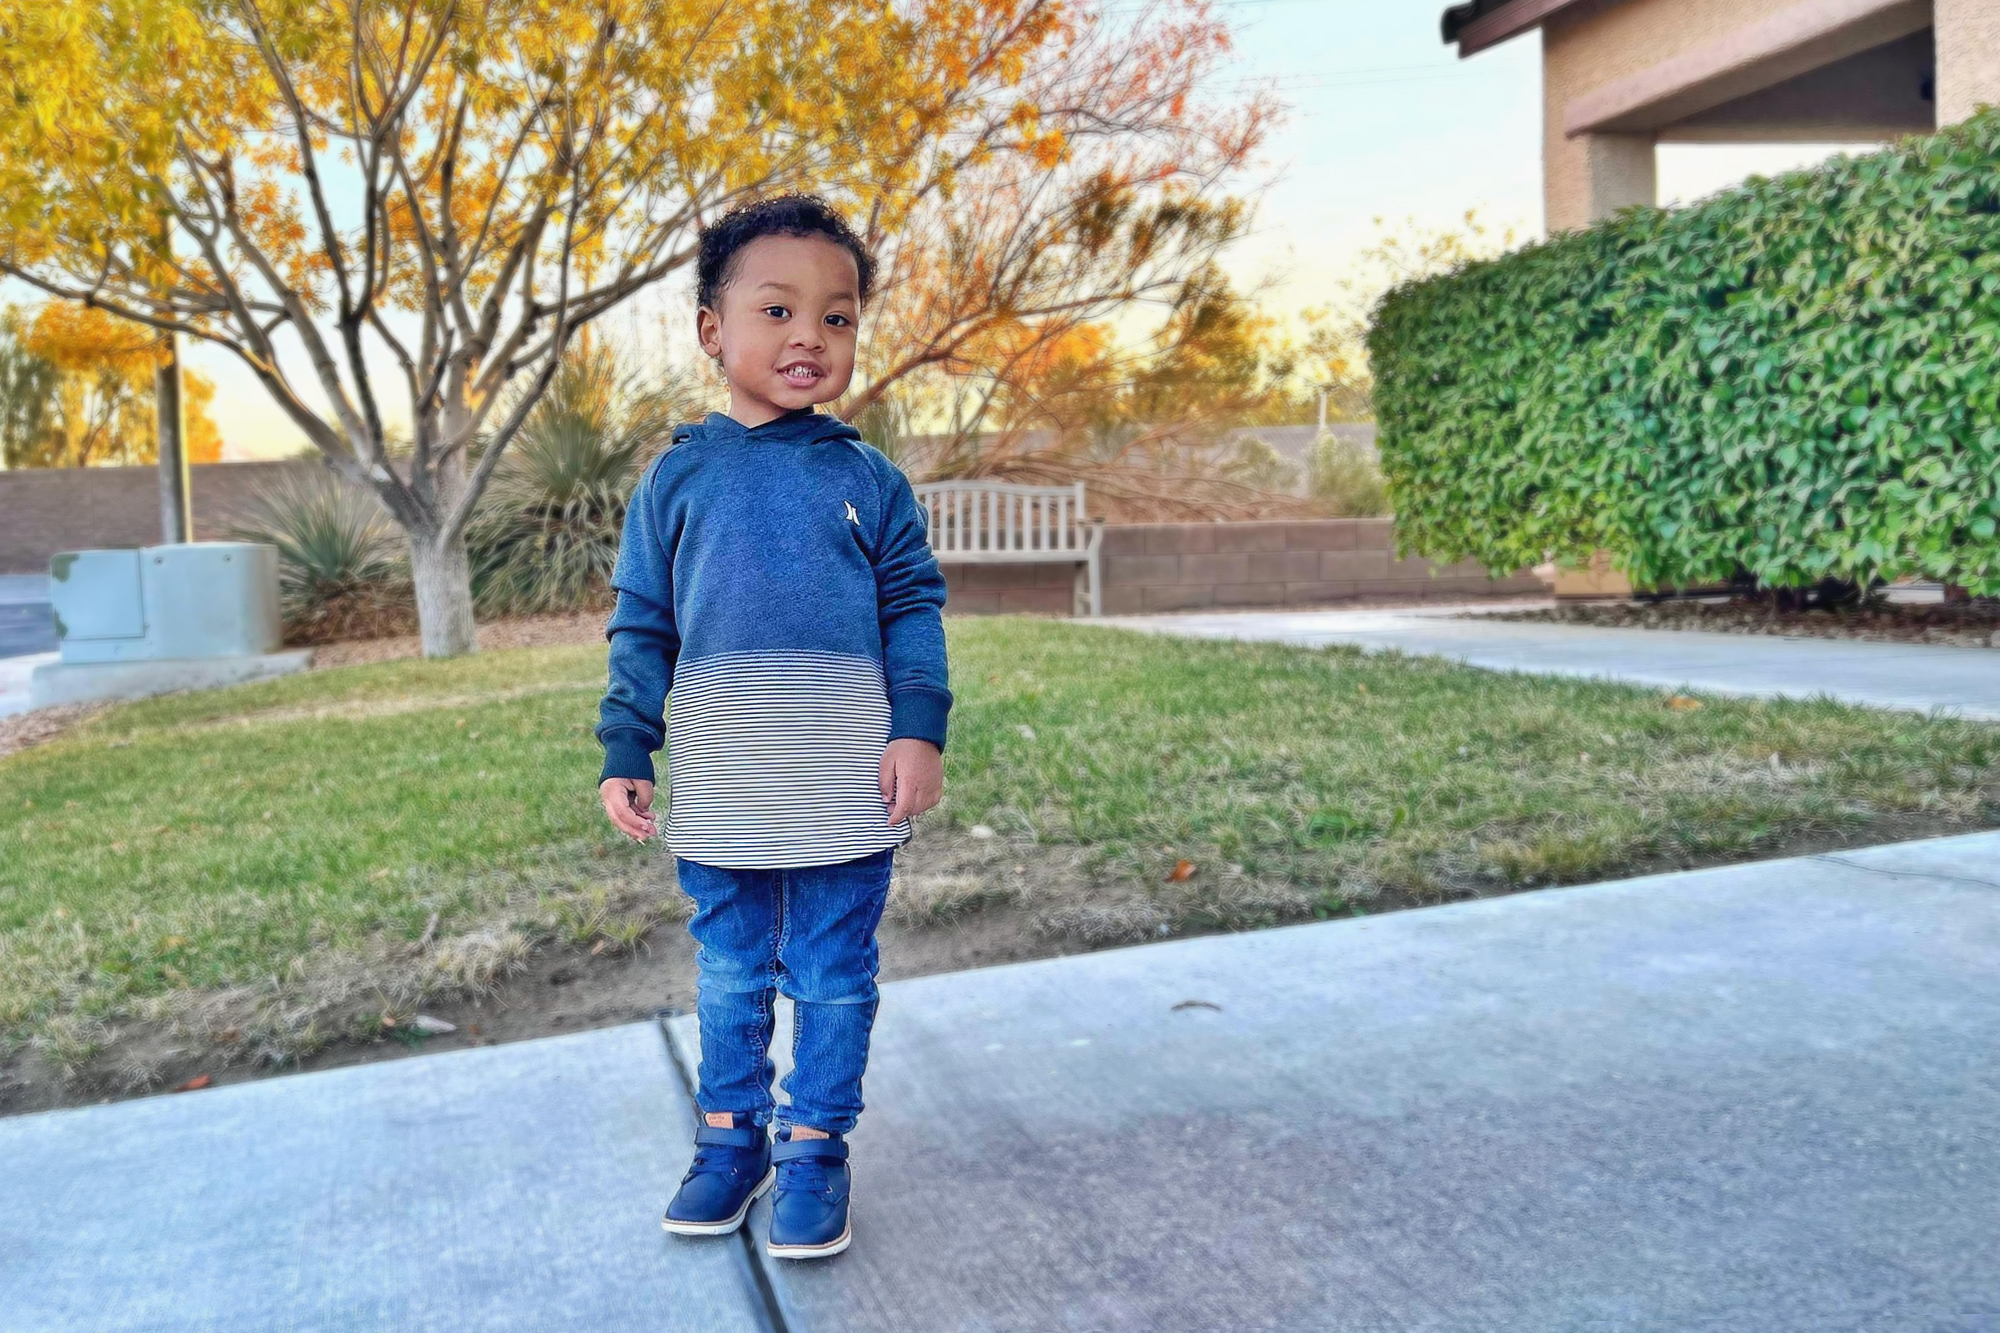  Stride Rite, children’s shoes, baby shoes, kids footwear, kids shoes, kids fashion, kids style, kids ootd, toddler fashion, toddler style, toddler ootd, hezekiah champ bethea
